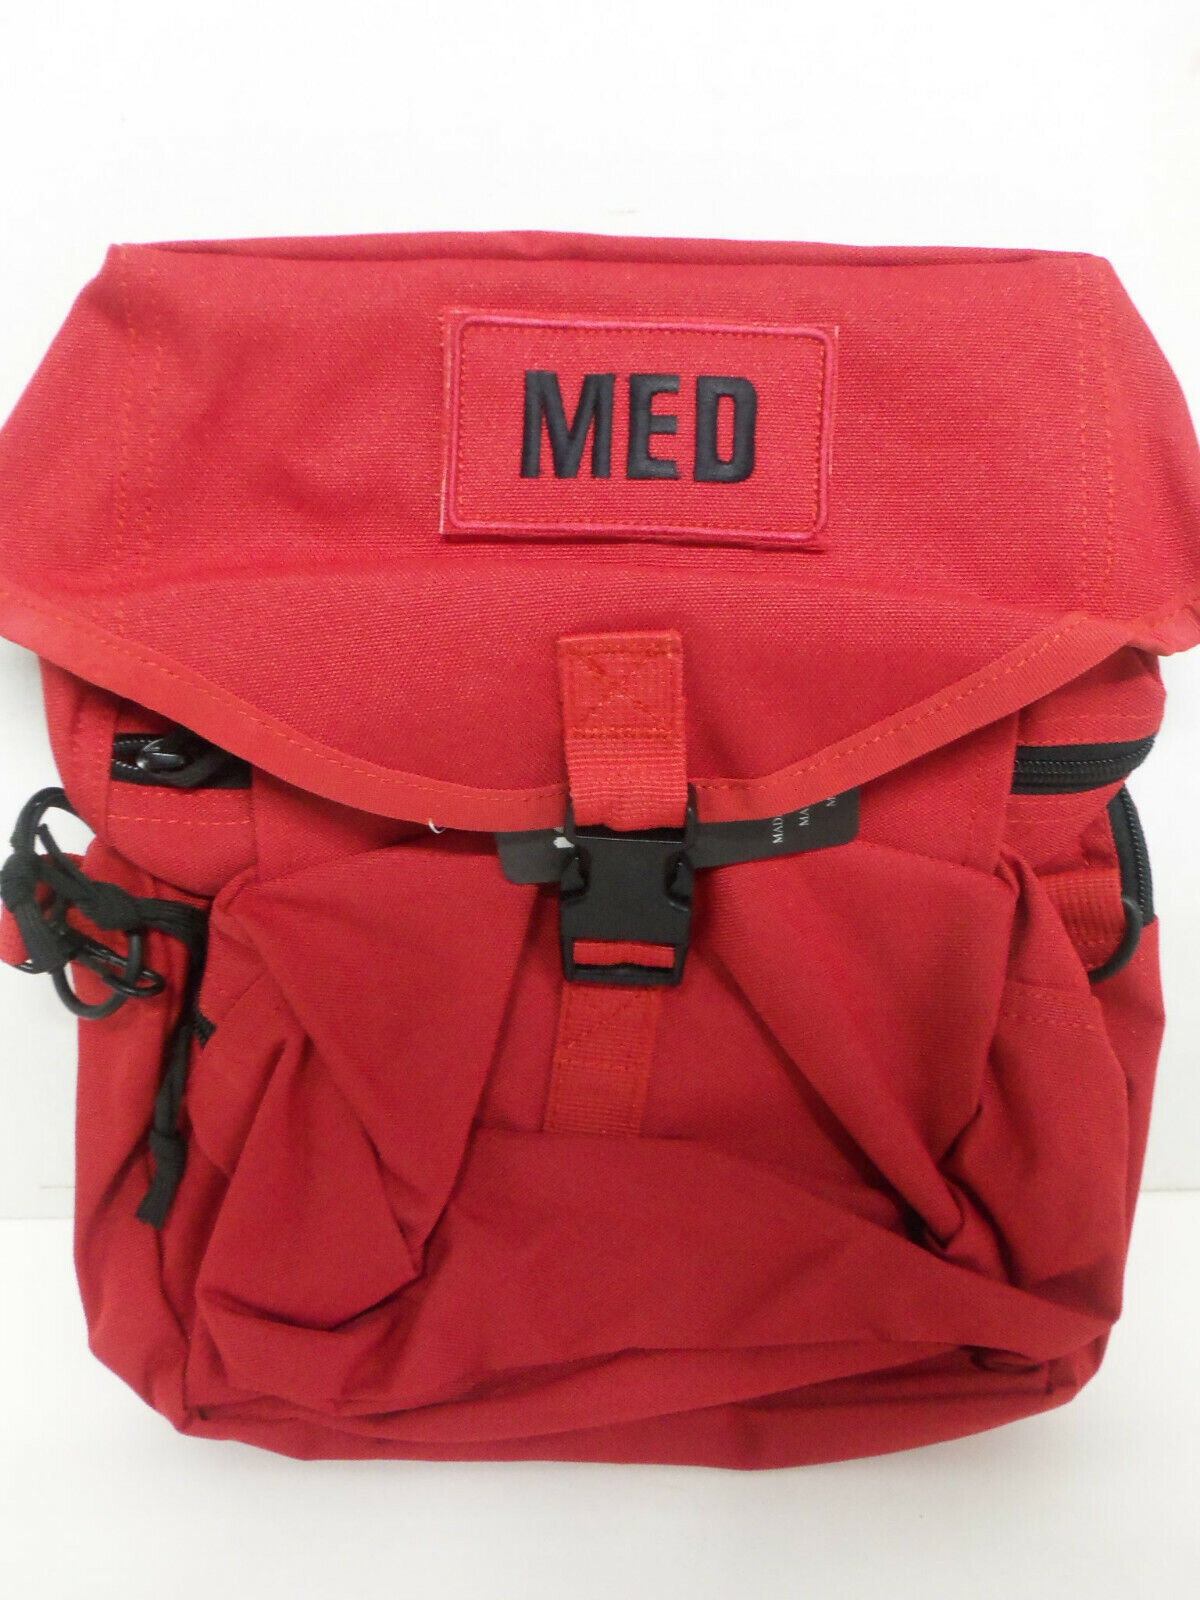 Primary image for NEW Elite First Aid M-3 Trifold IFAK EMT CLS Medical MOLLE Field Bag MEDIC RED